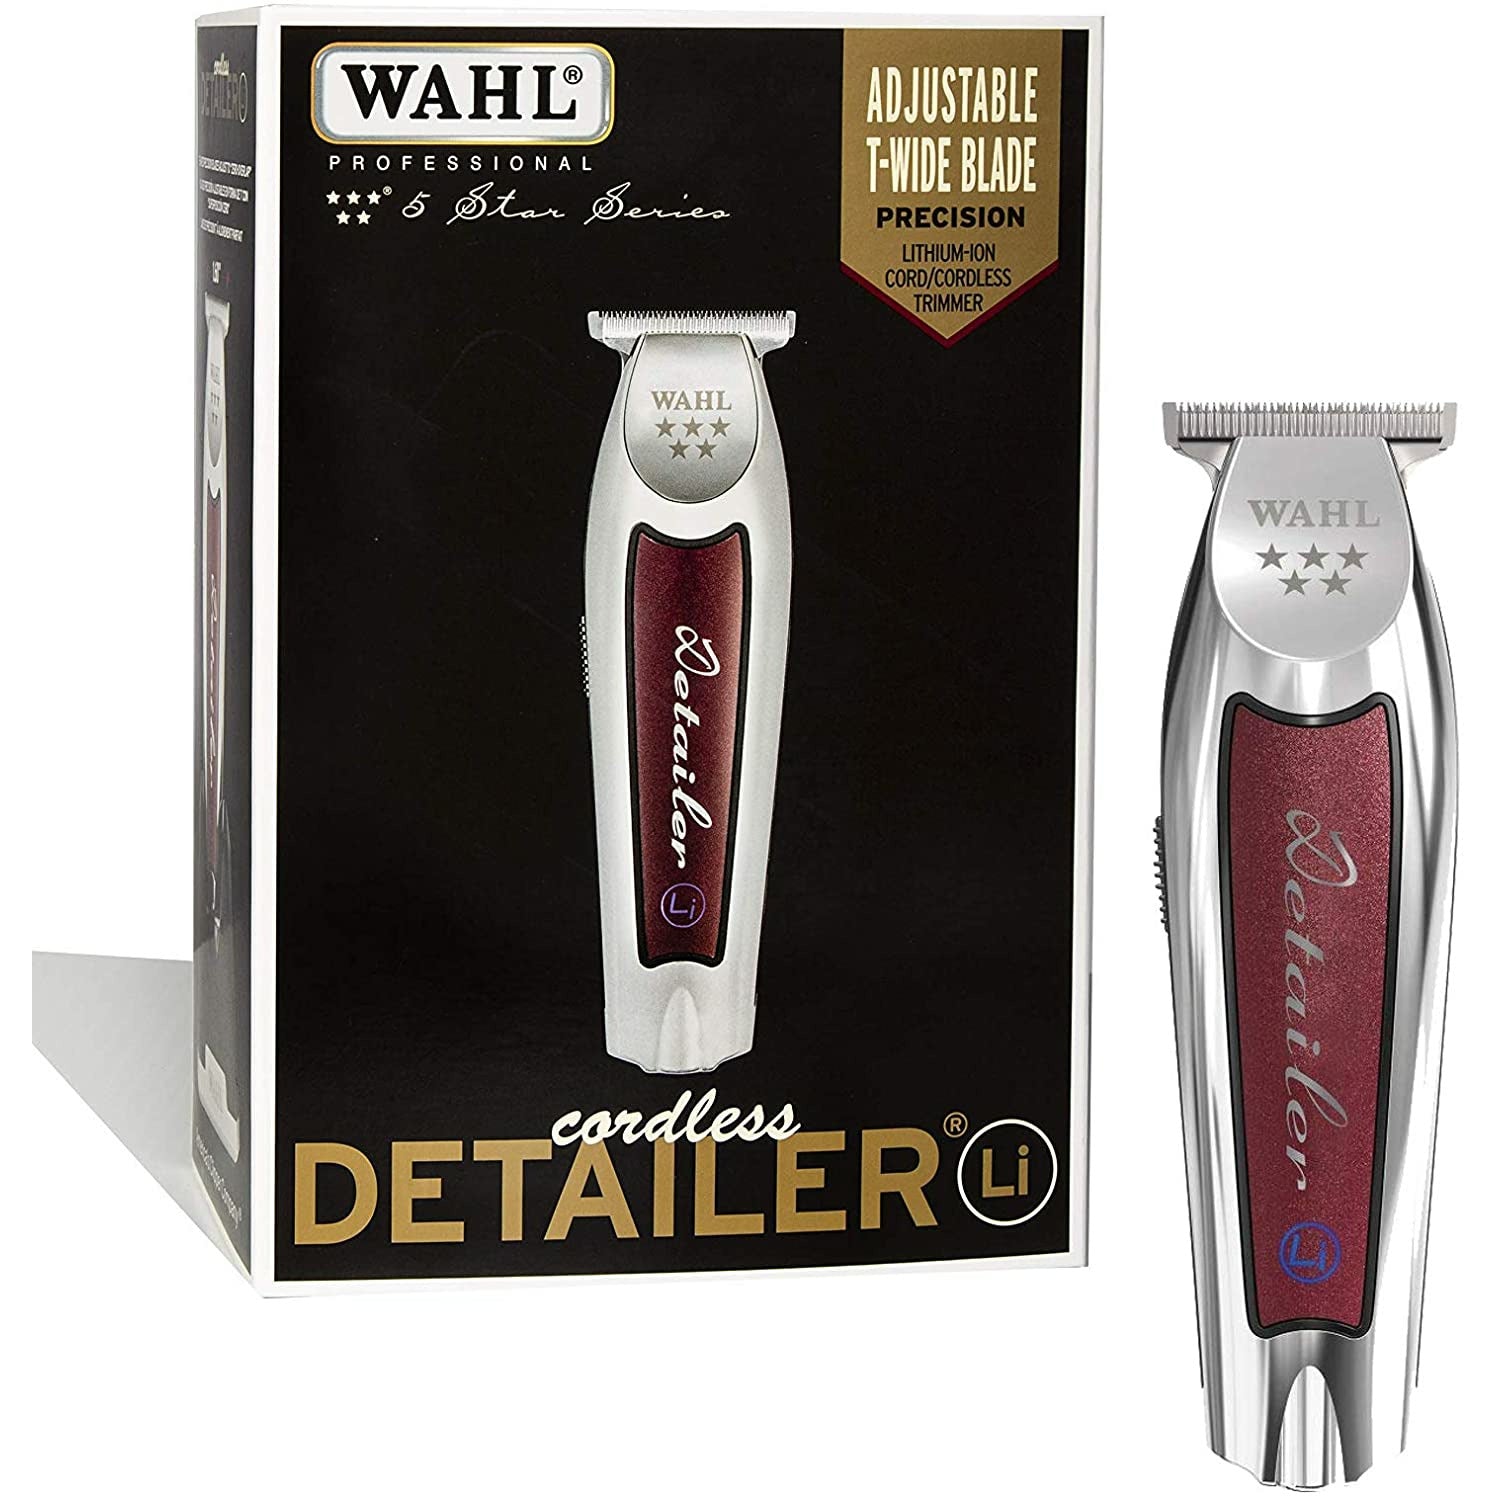 In you're opinion…. Has the Wahl detailer cordless lost its reputation and  the new companies have knocked it off the porch? : r/Barber